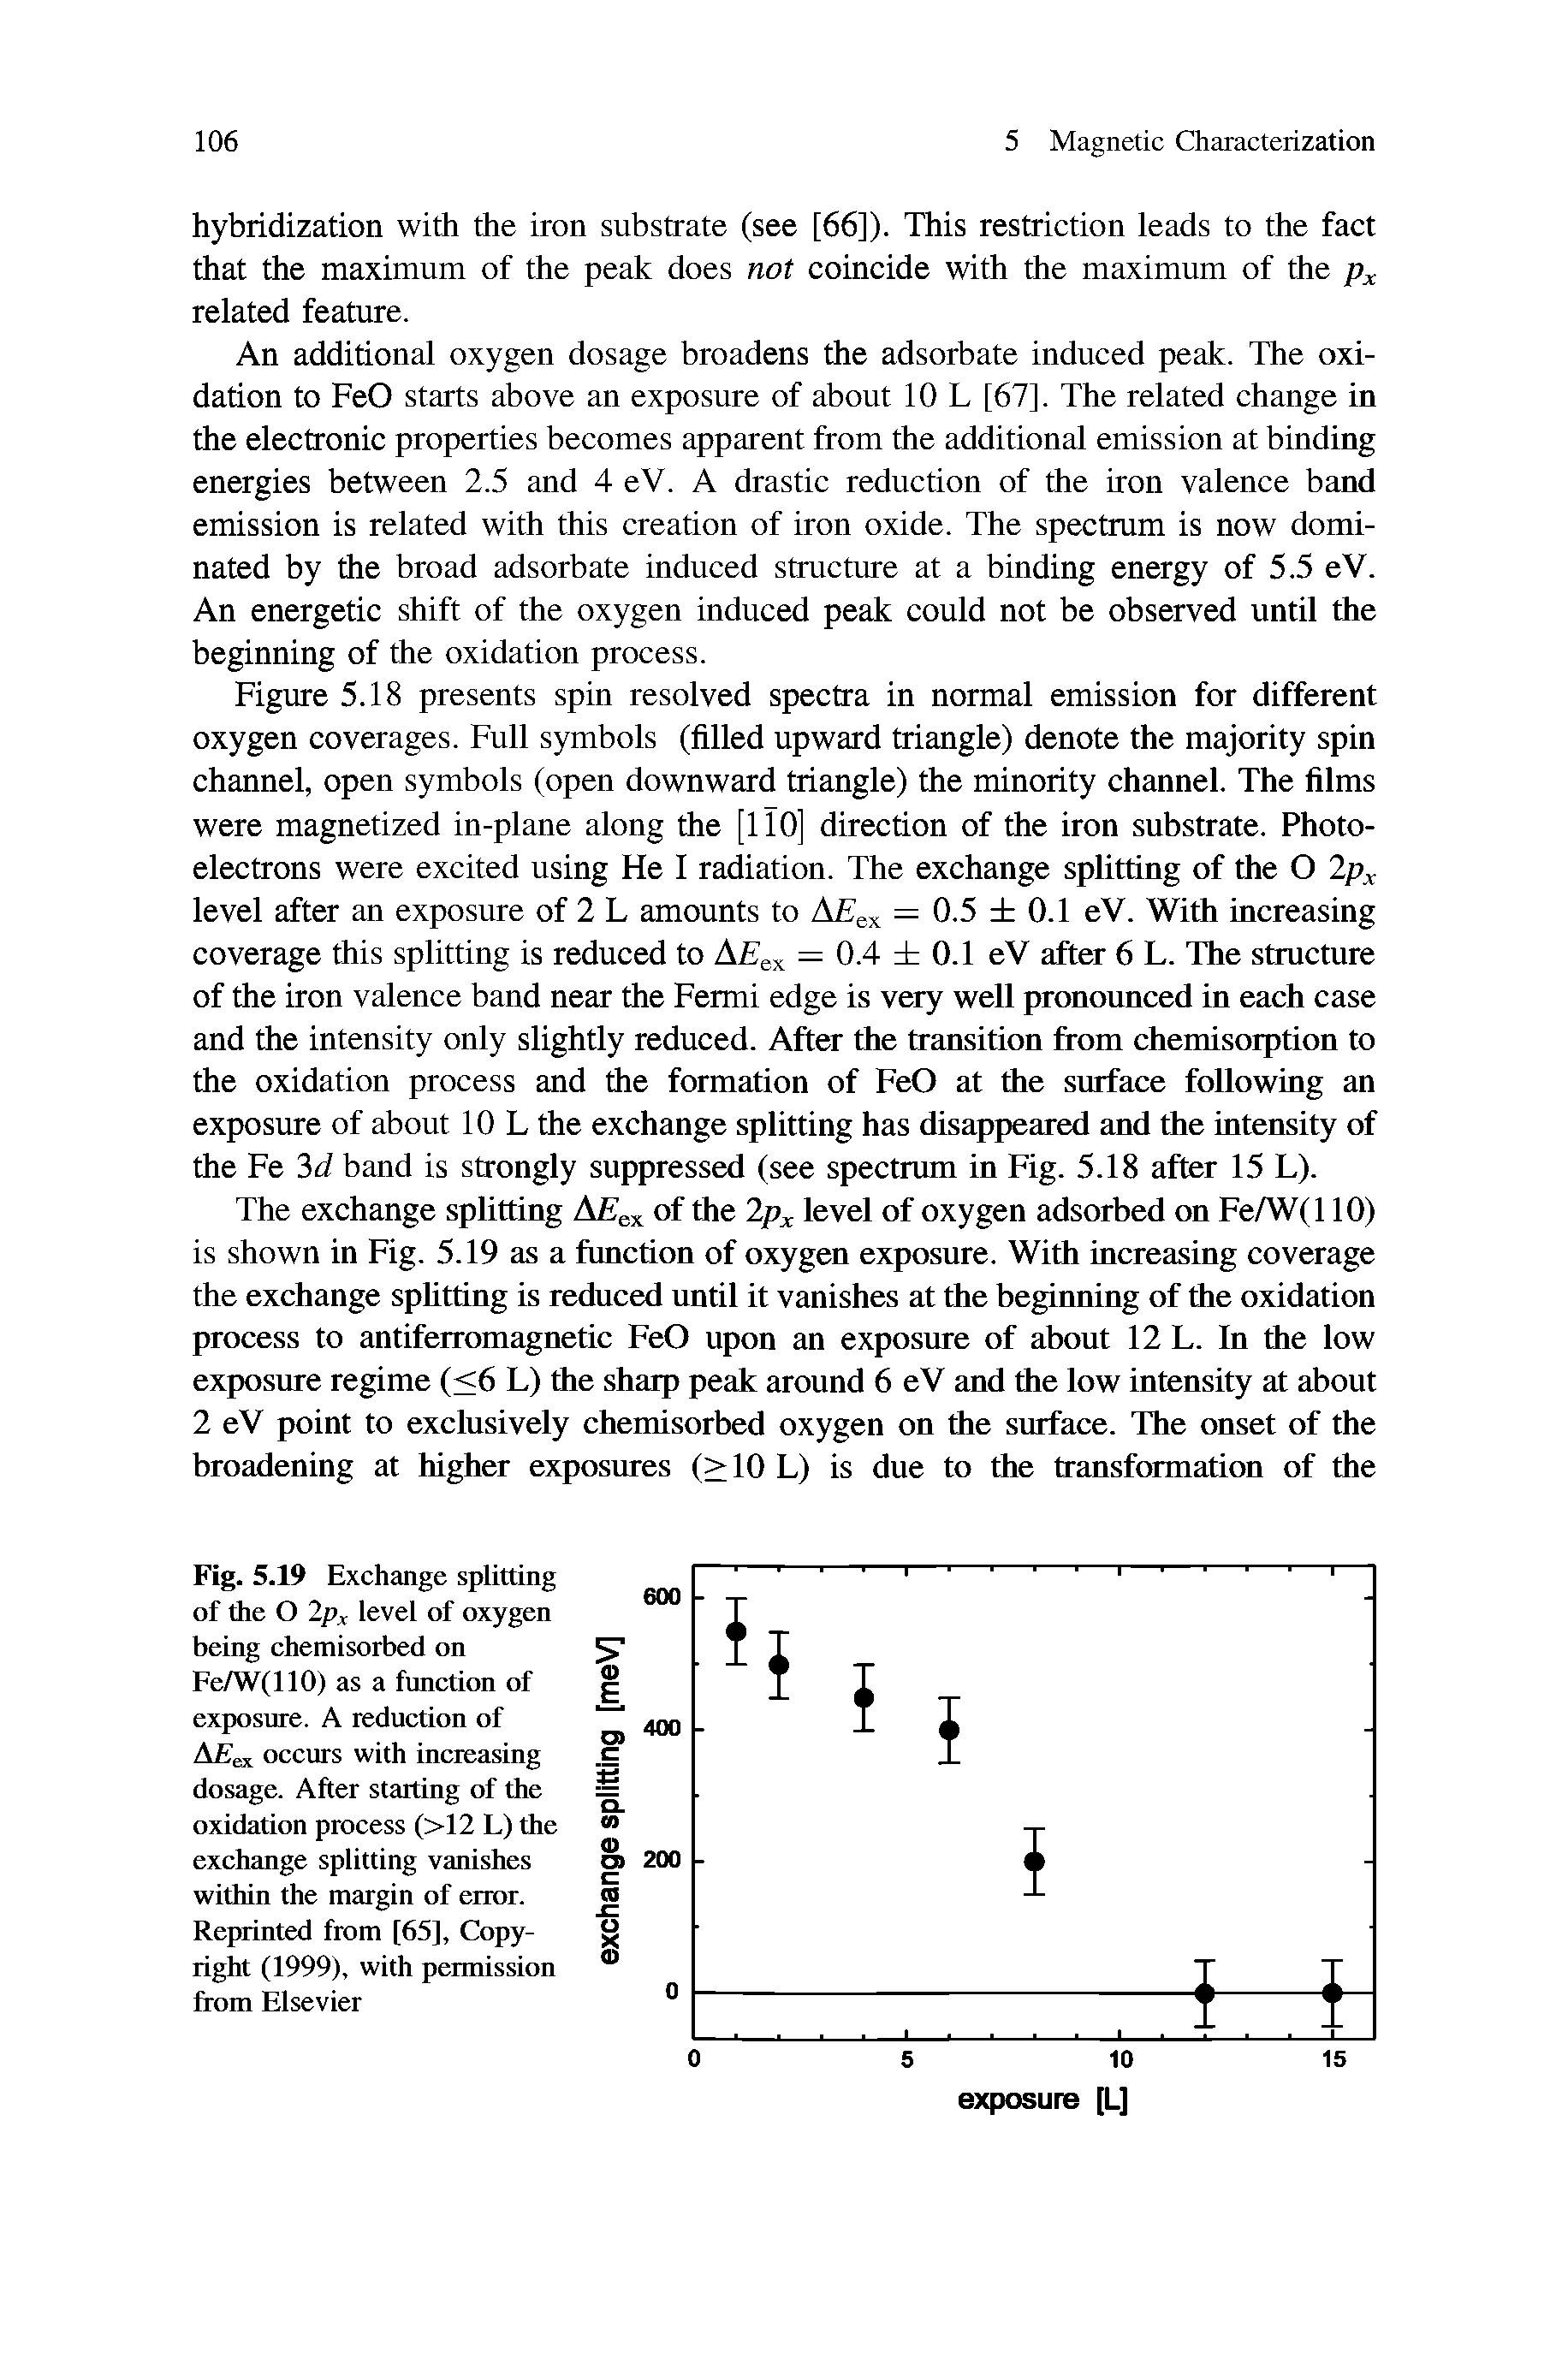 Fig. 5.19 Exchange splitting of the O 2px level of oxygen being chemisorbed on Fe/W(110) as a function of exposure. A reduction of occurs with increasing dosage. After starting of the oxidation process (>12 L) the exchange splitting vanishes within the margin of error. Reprinted from [65], Copyright (1999), with permission from Elsevier...